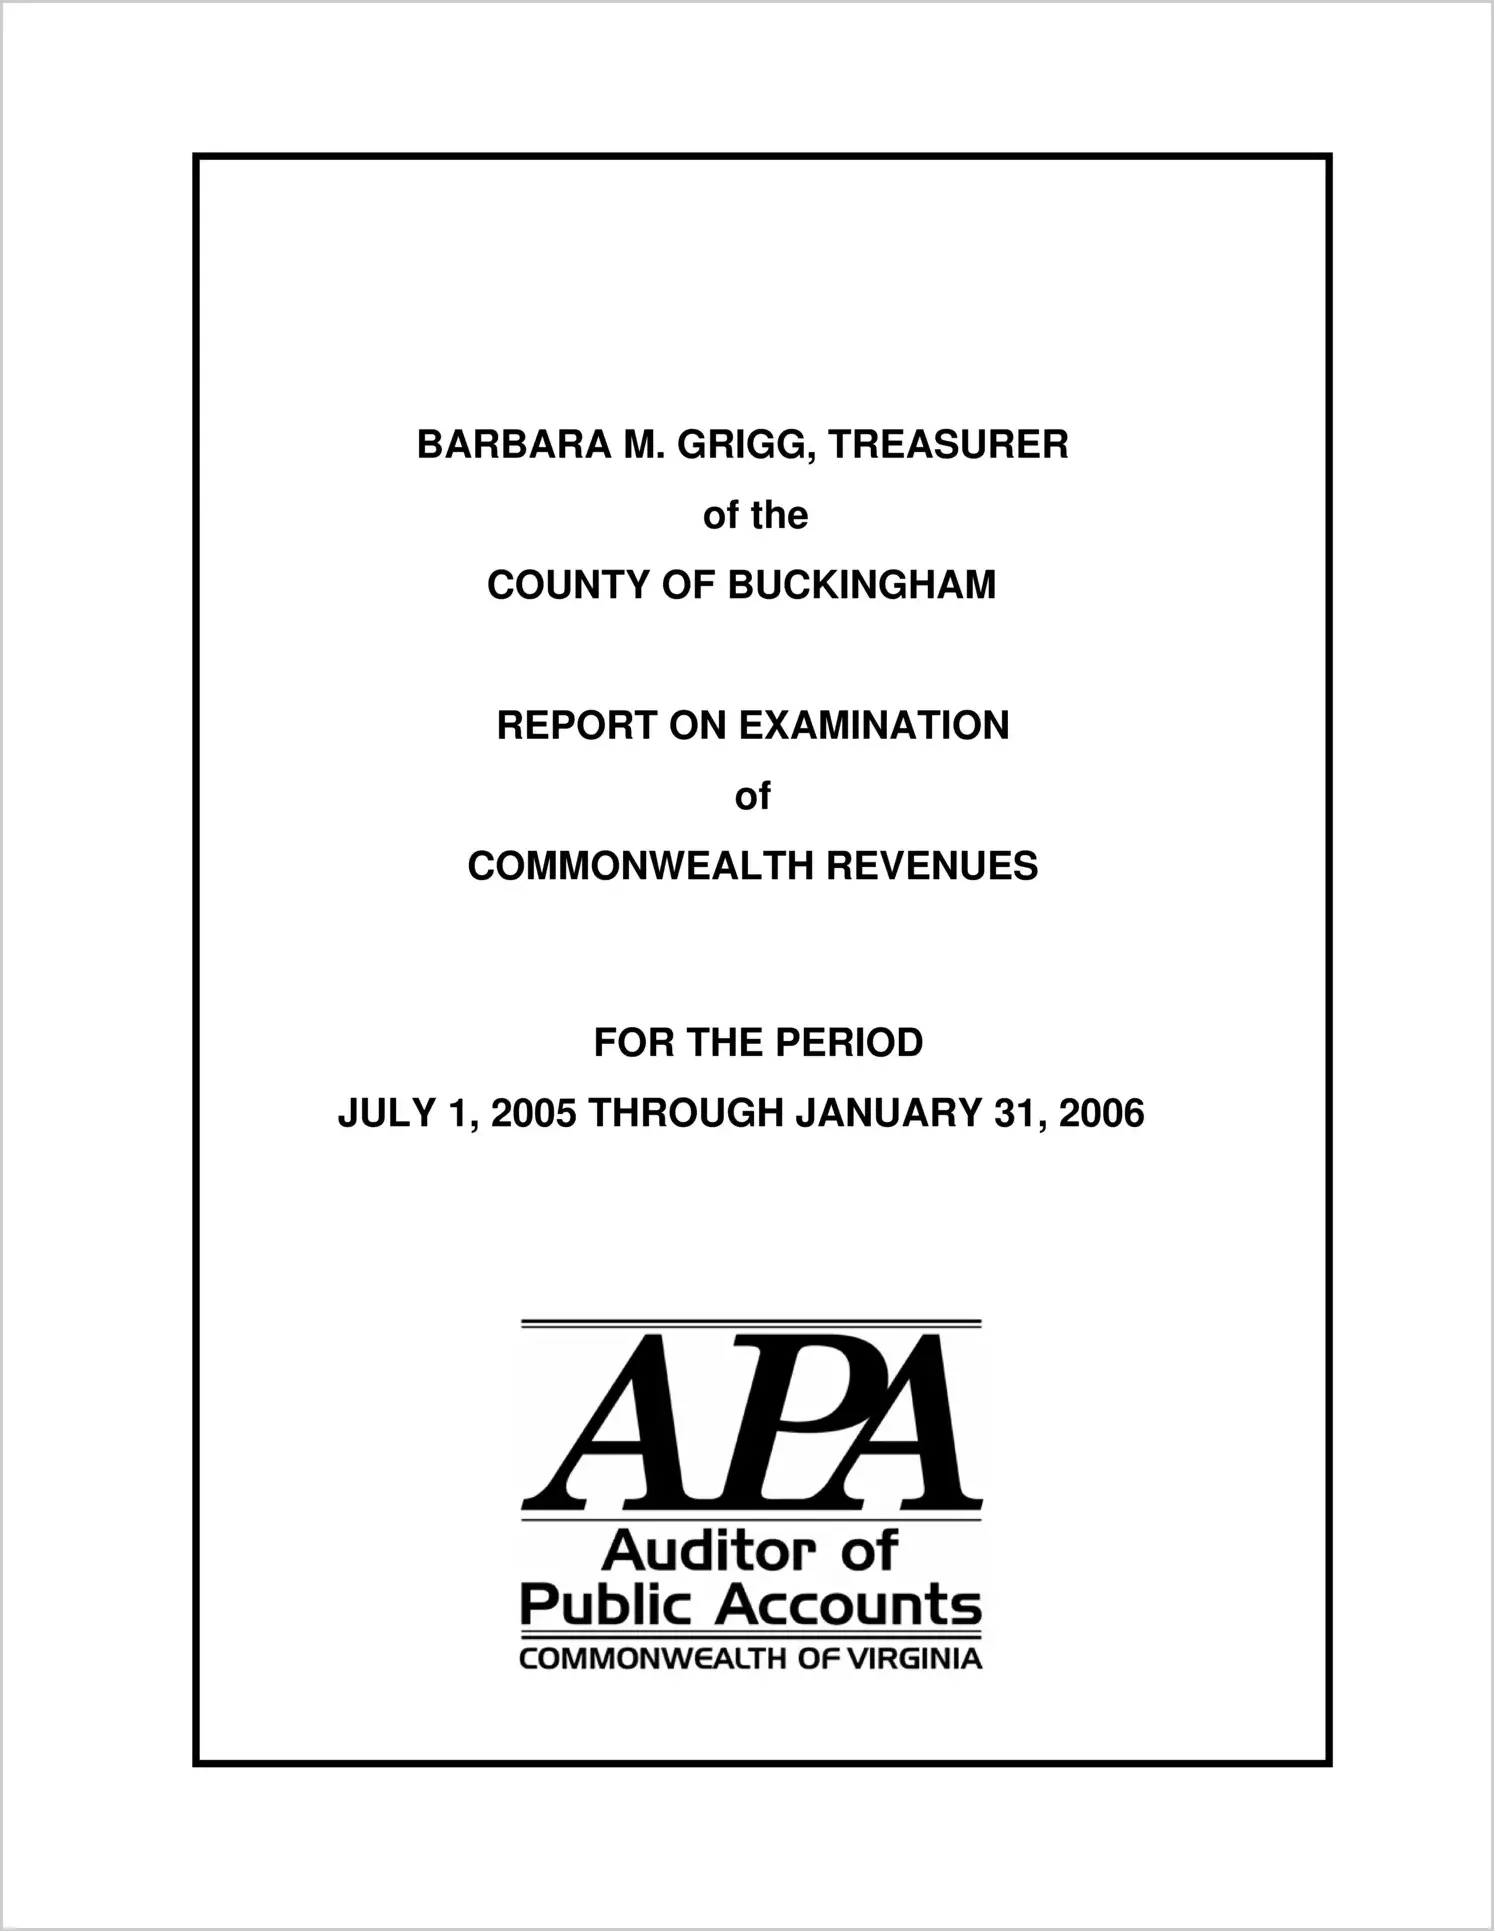 Barbara M. Grigg of the County of Buckingham Report on Examination of the Commonwealth Revenues for the period July 1, 2005 through January 31, 2006